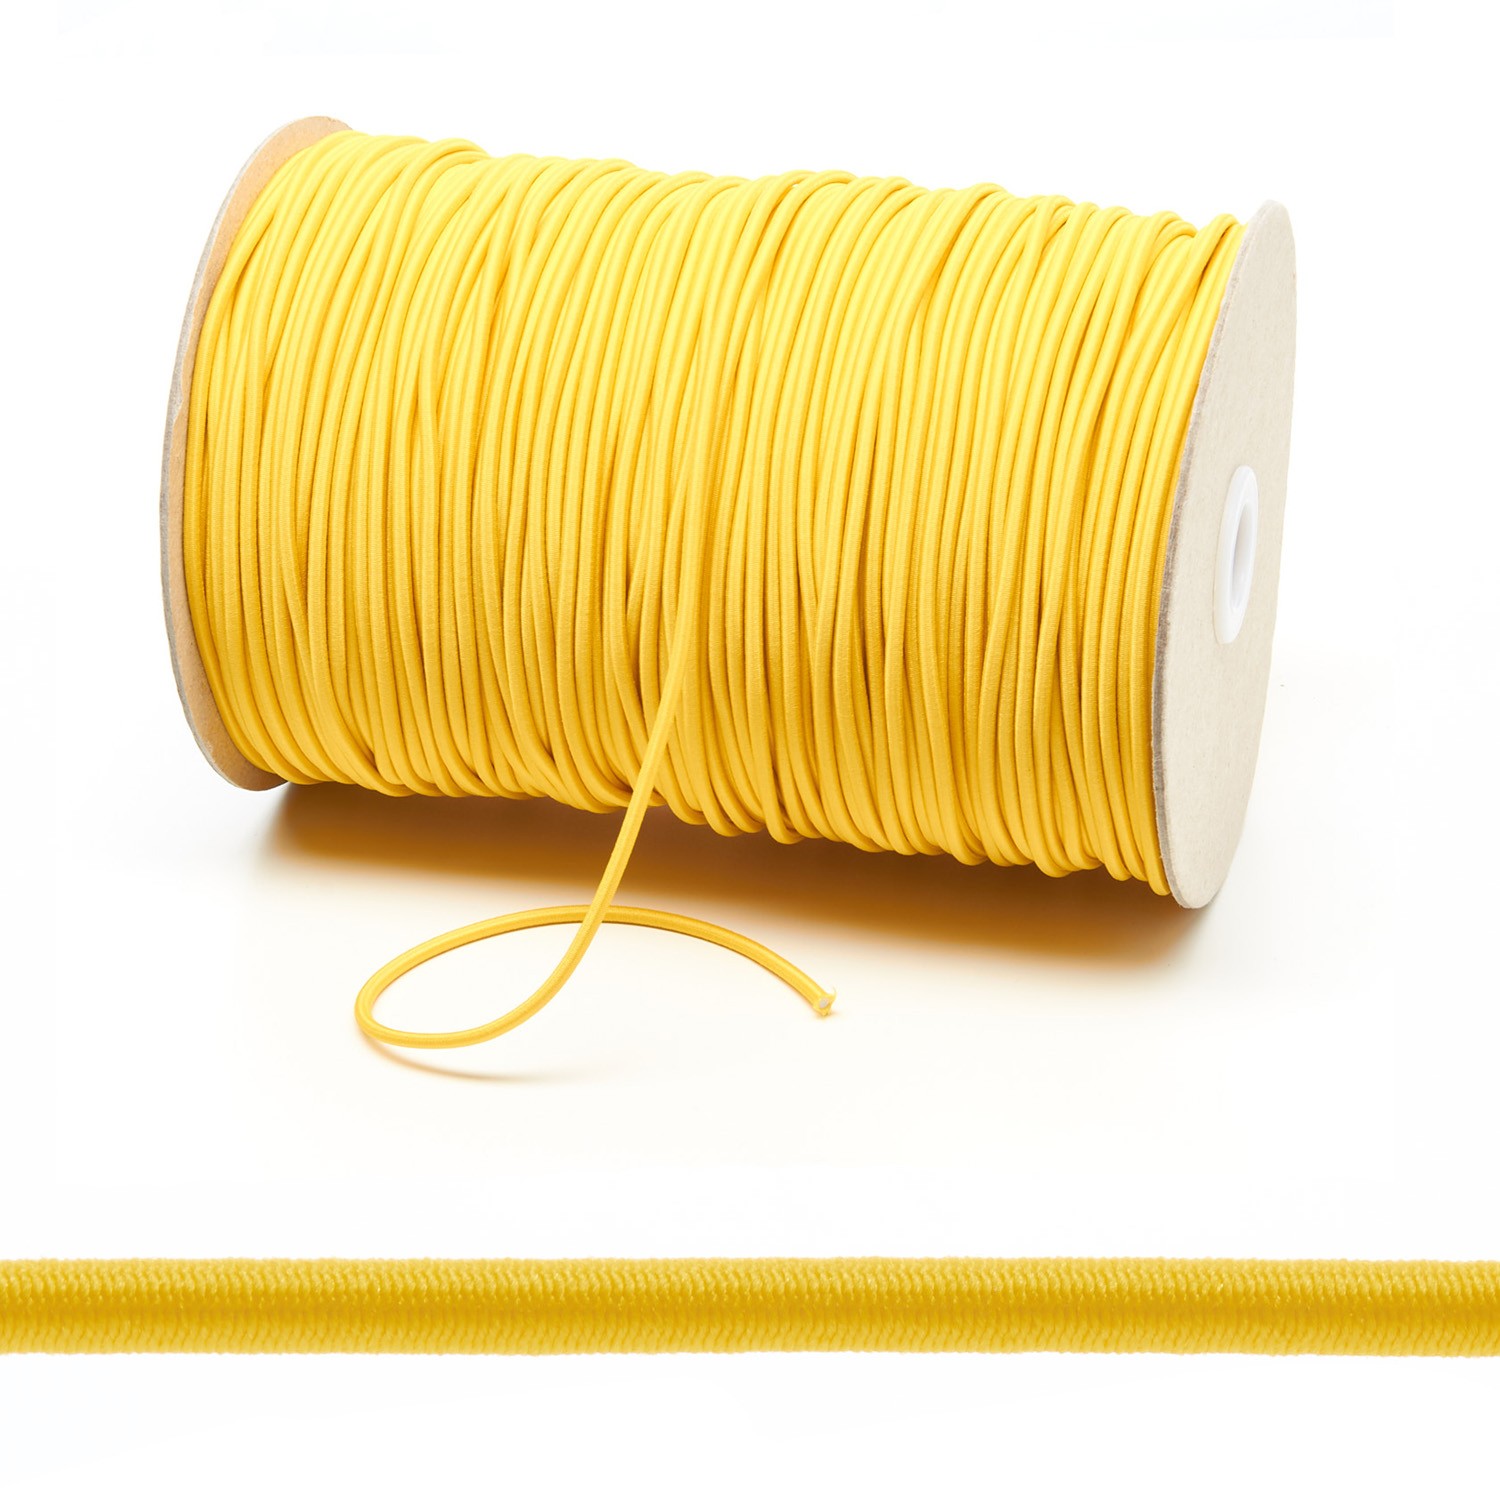 2mm Yellow Thin Fine Round Elastic Cord TPE84 Composite 1 Kalsi Cords